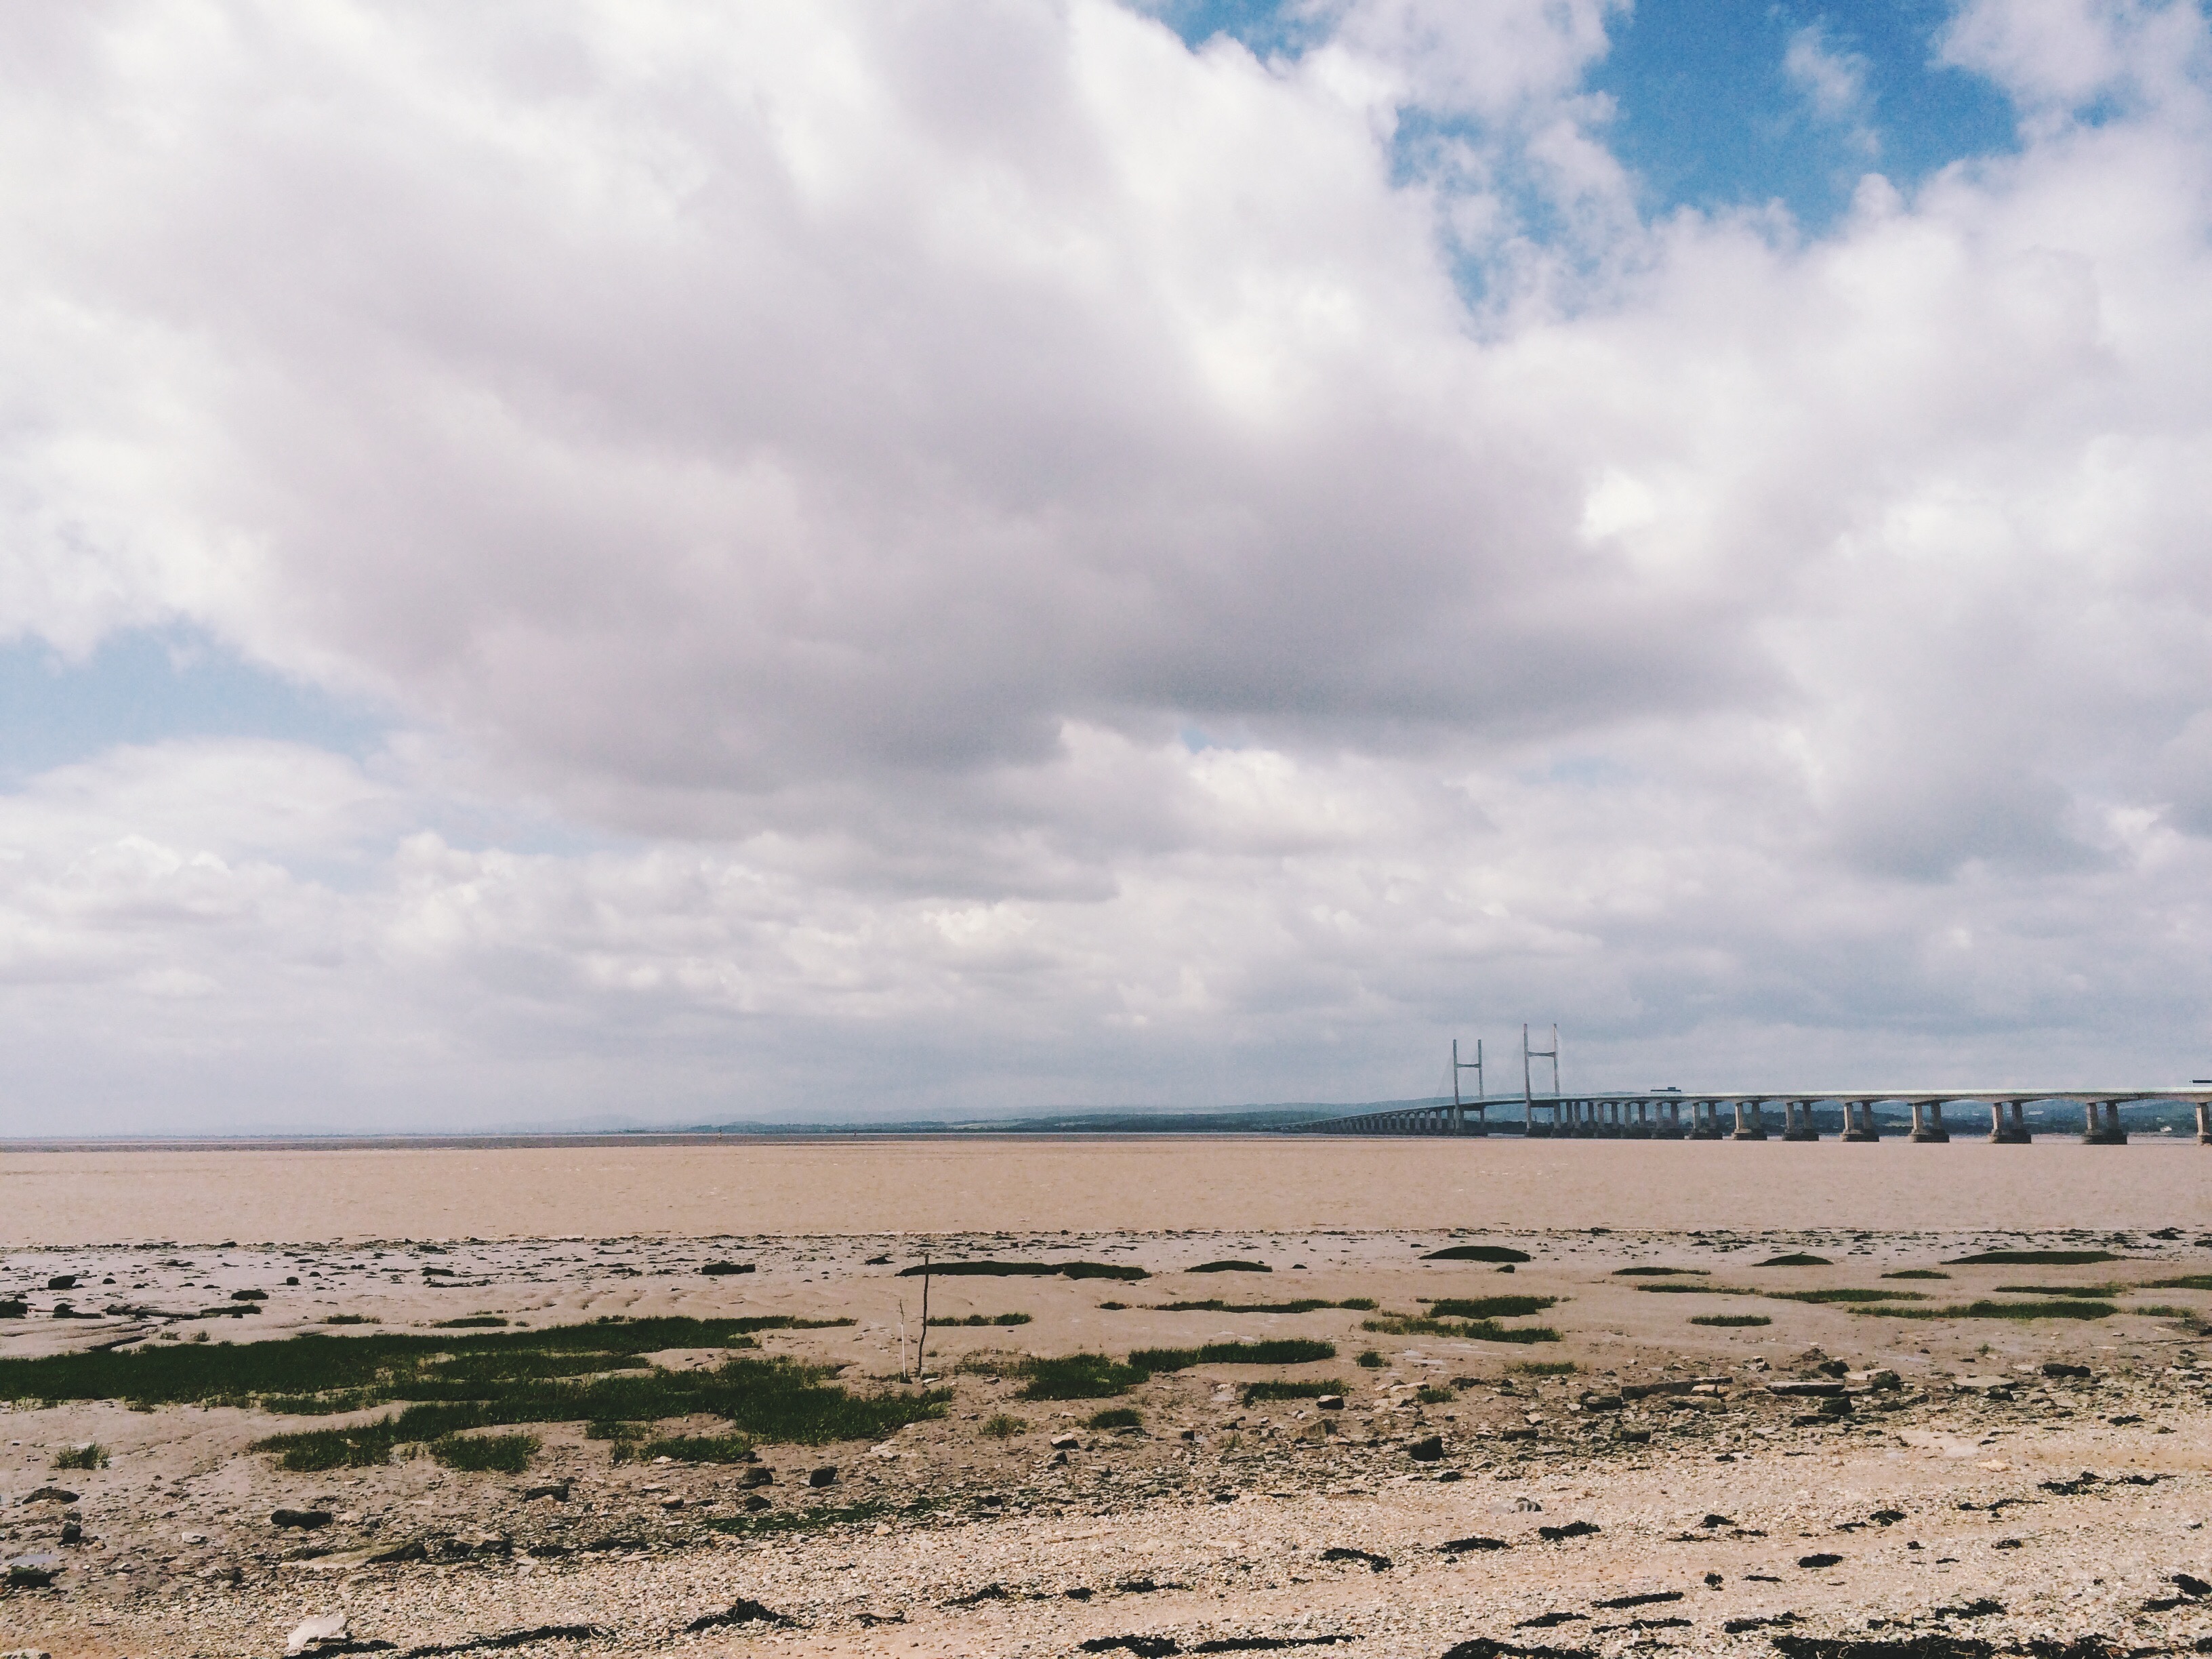 The Severn estuary from Severn Beach. Photo by Marianna Dudley